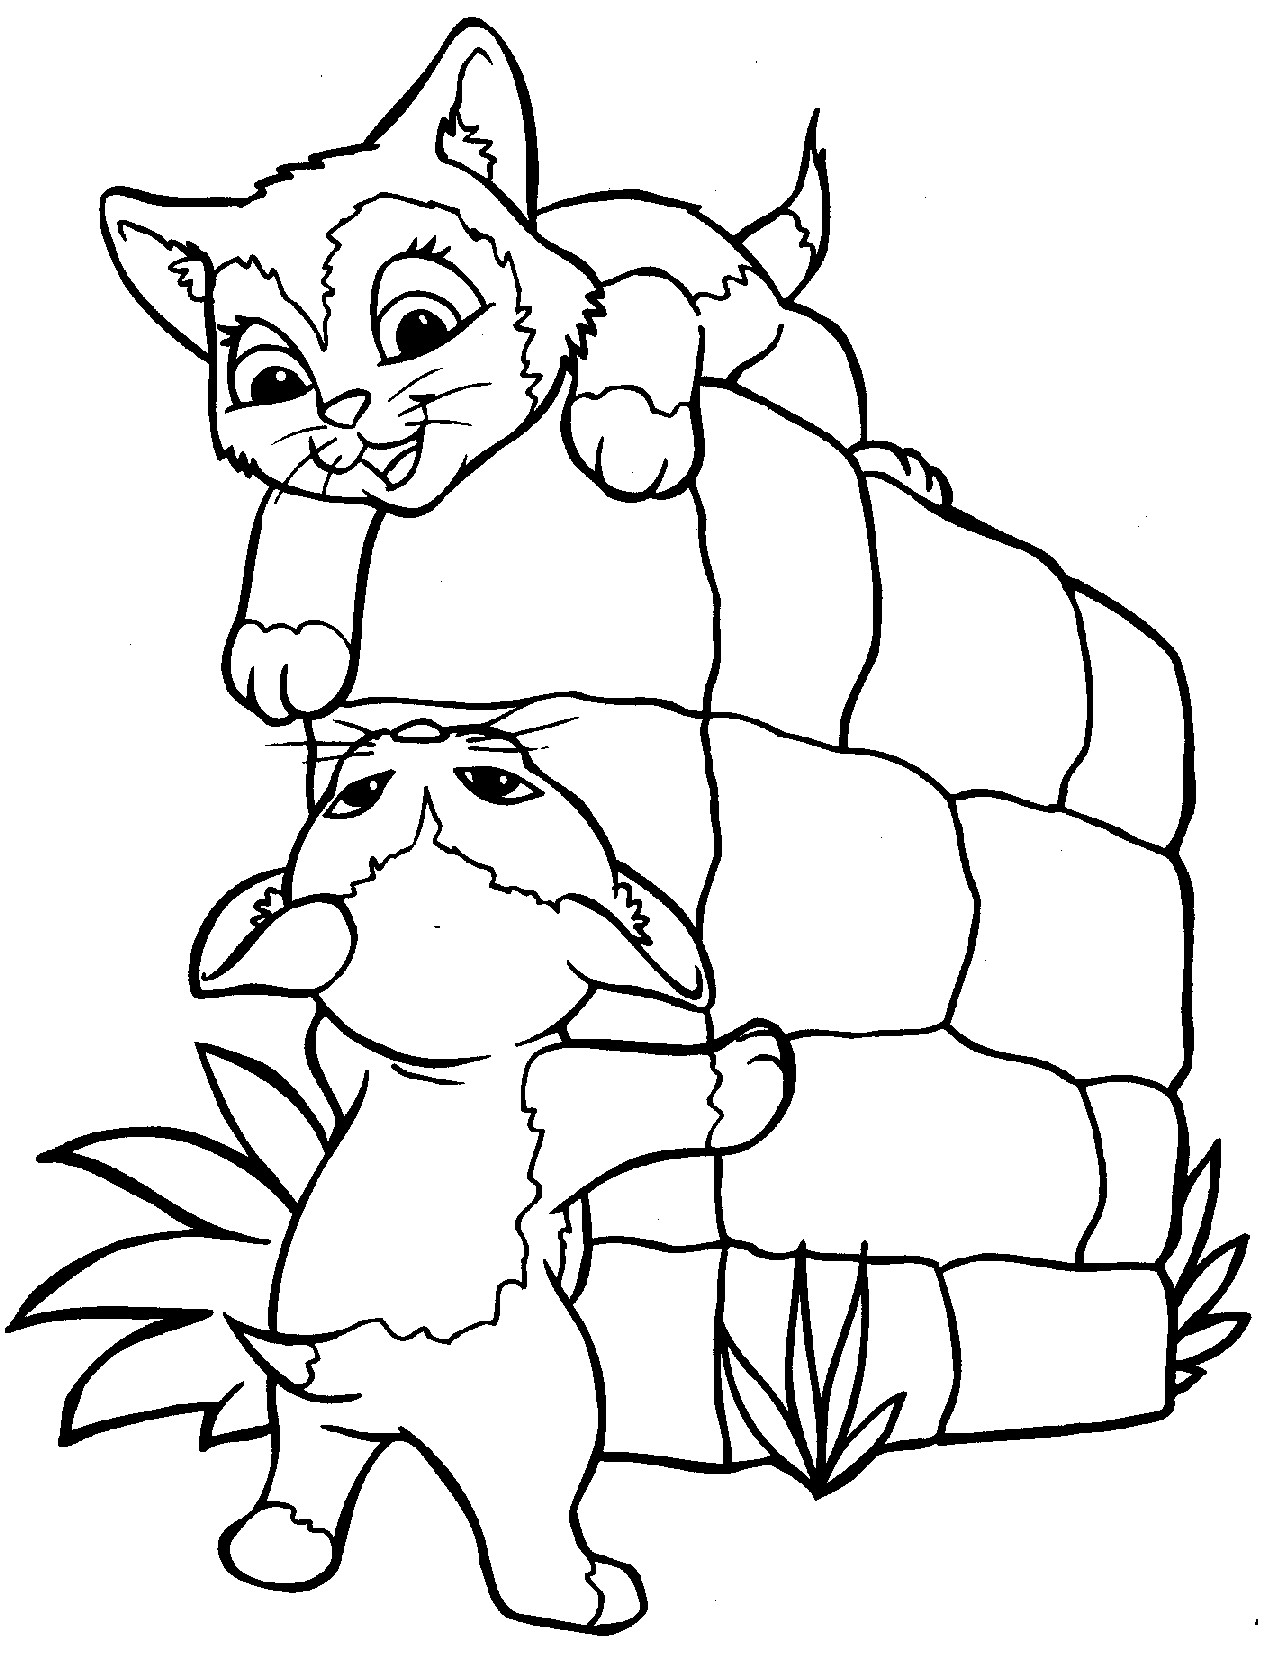 Printable Coloring Pages Cats
 Free Printable Cat Coloring Pages For Kids